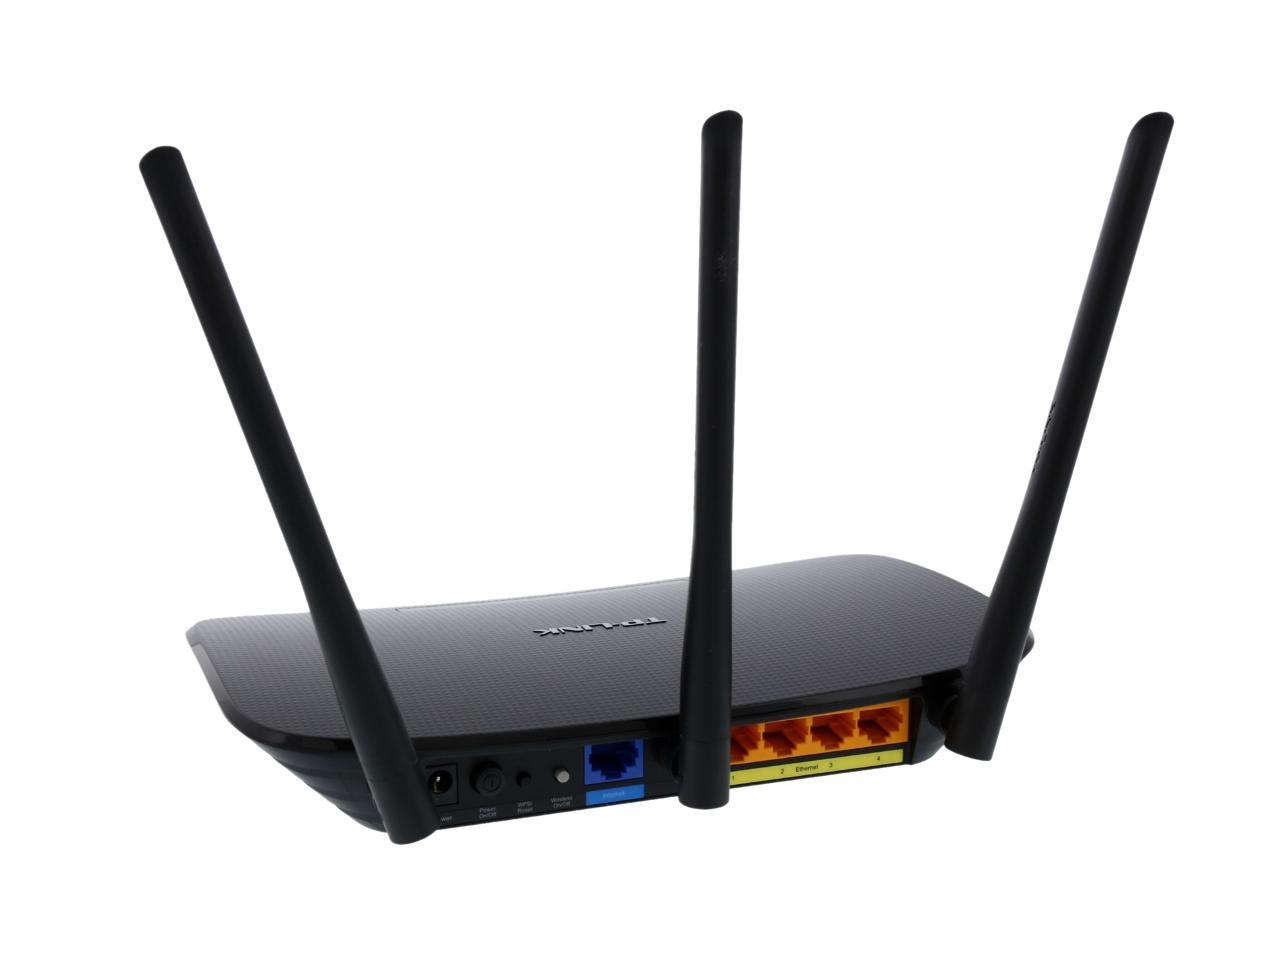 clean up mute seven TP-Link N450 WiFi Router - Wireless Internet Router for Home (TL-WR940N) -  Newegg.com